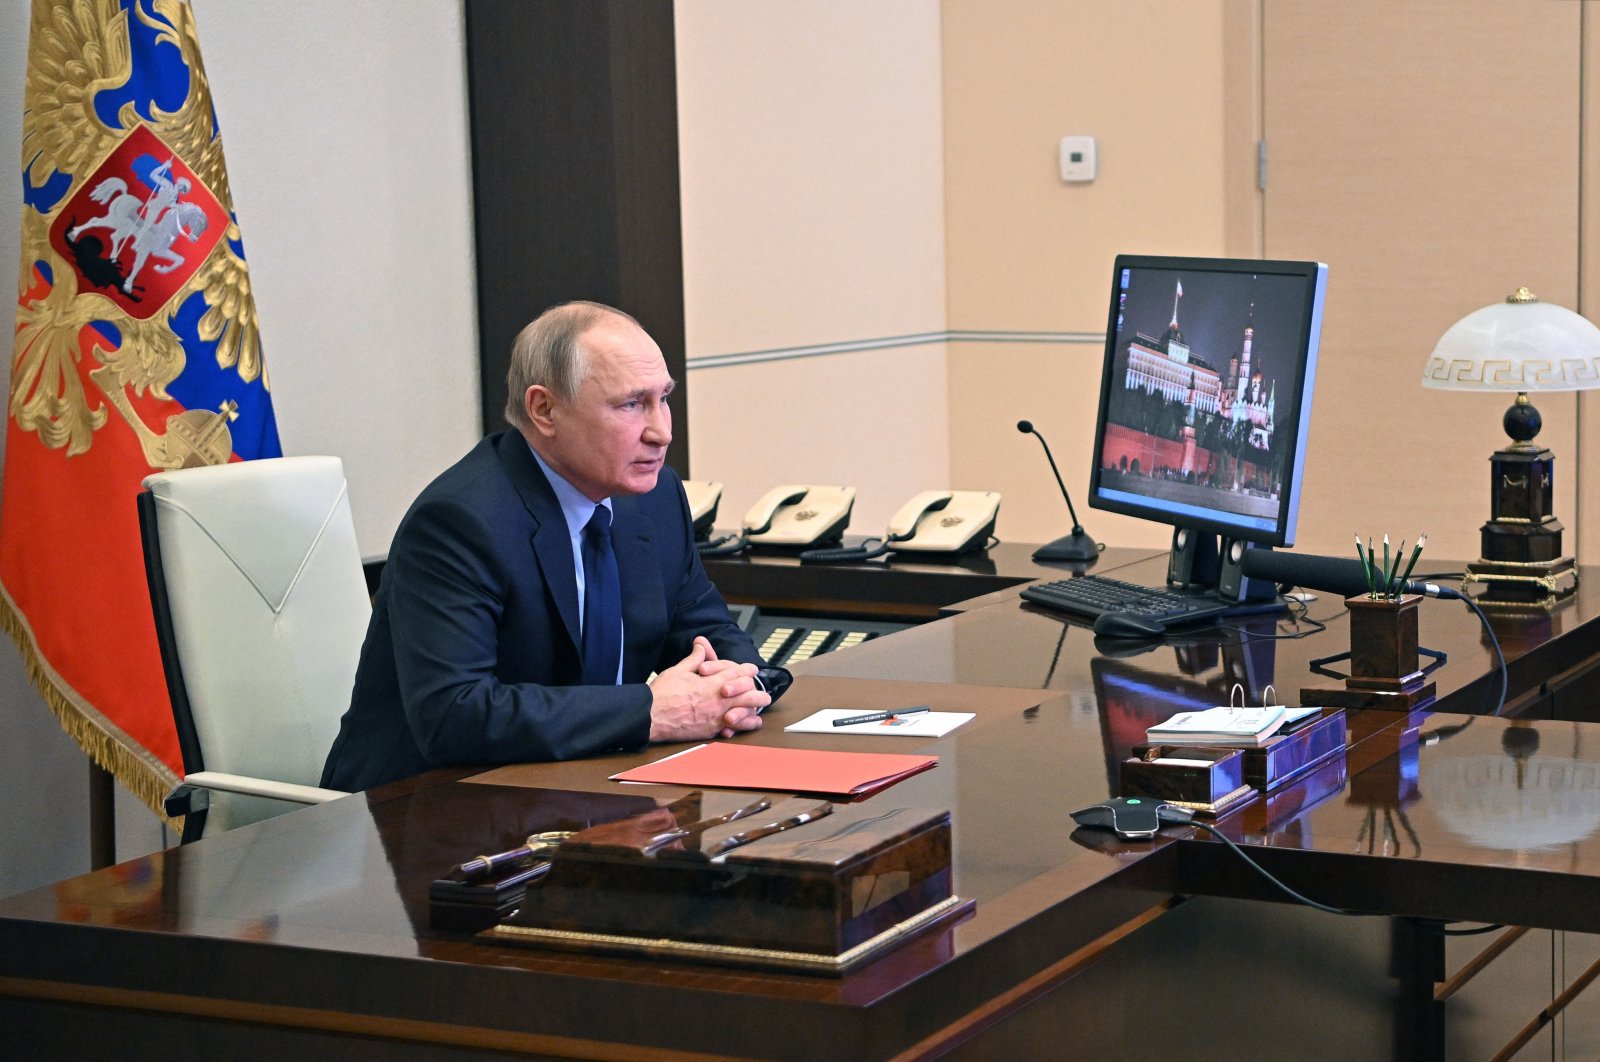 Russian President Vladimir Putin chairs a meeting with members of the Security Council via teleconference call, at the Novo-Ogaryovo state residence, outside Moscow, Russia, Feb. 11, 2022. (AFP Photo)